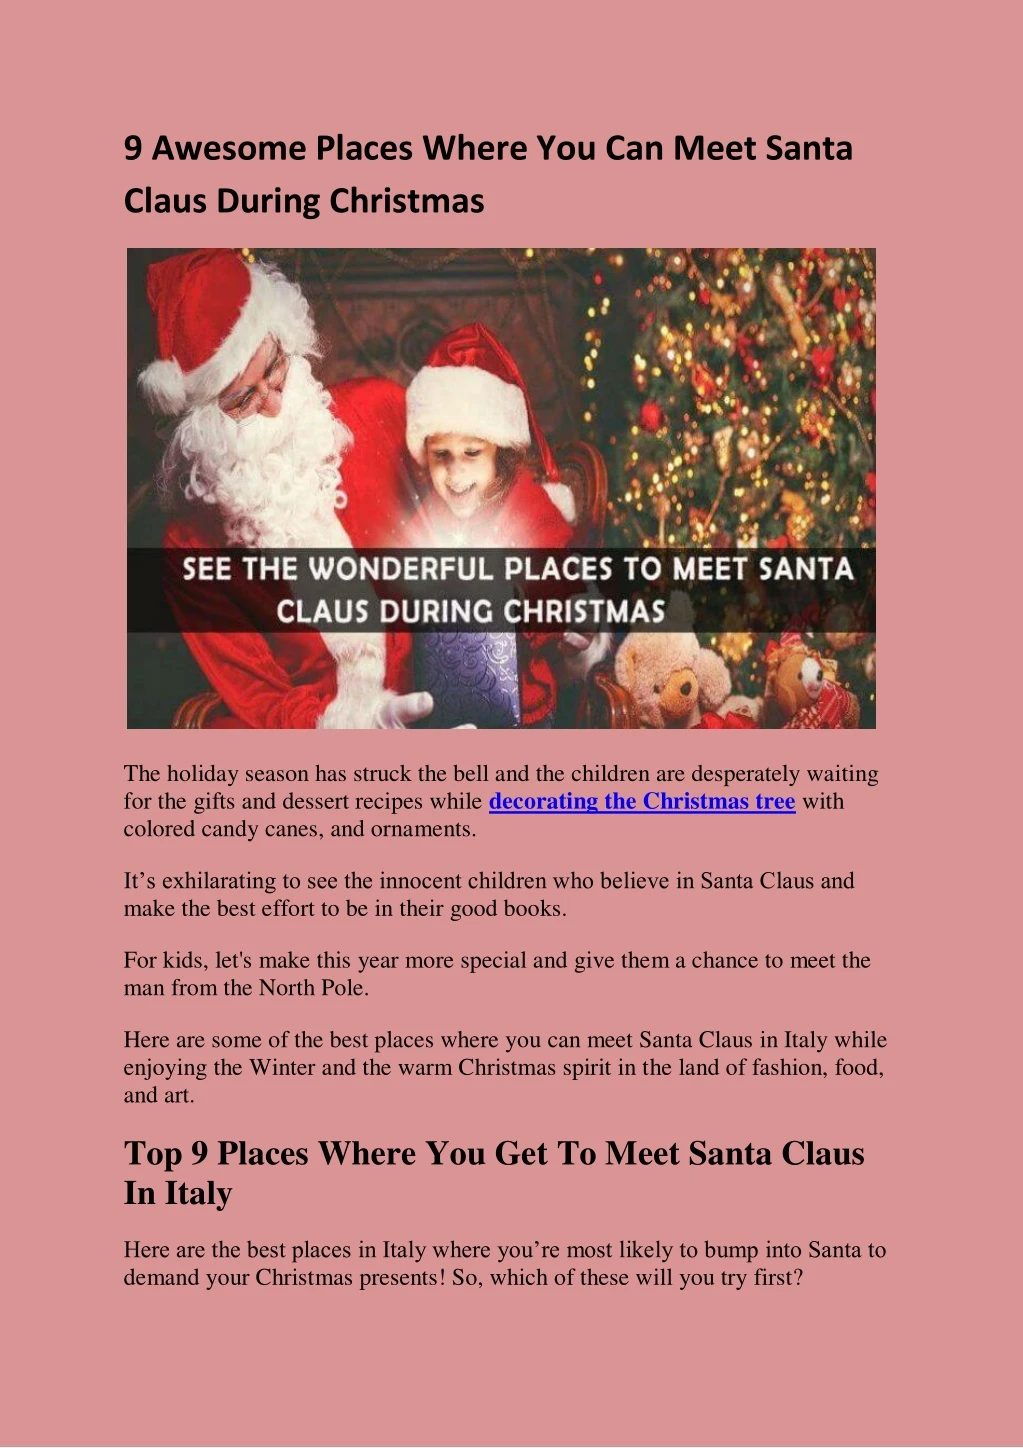 9 awesome places where you can meet santa claus